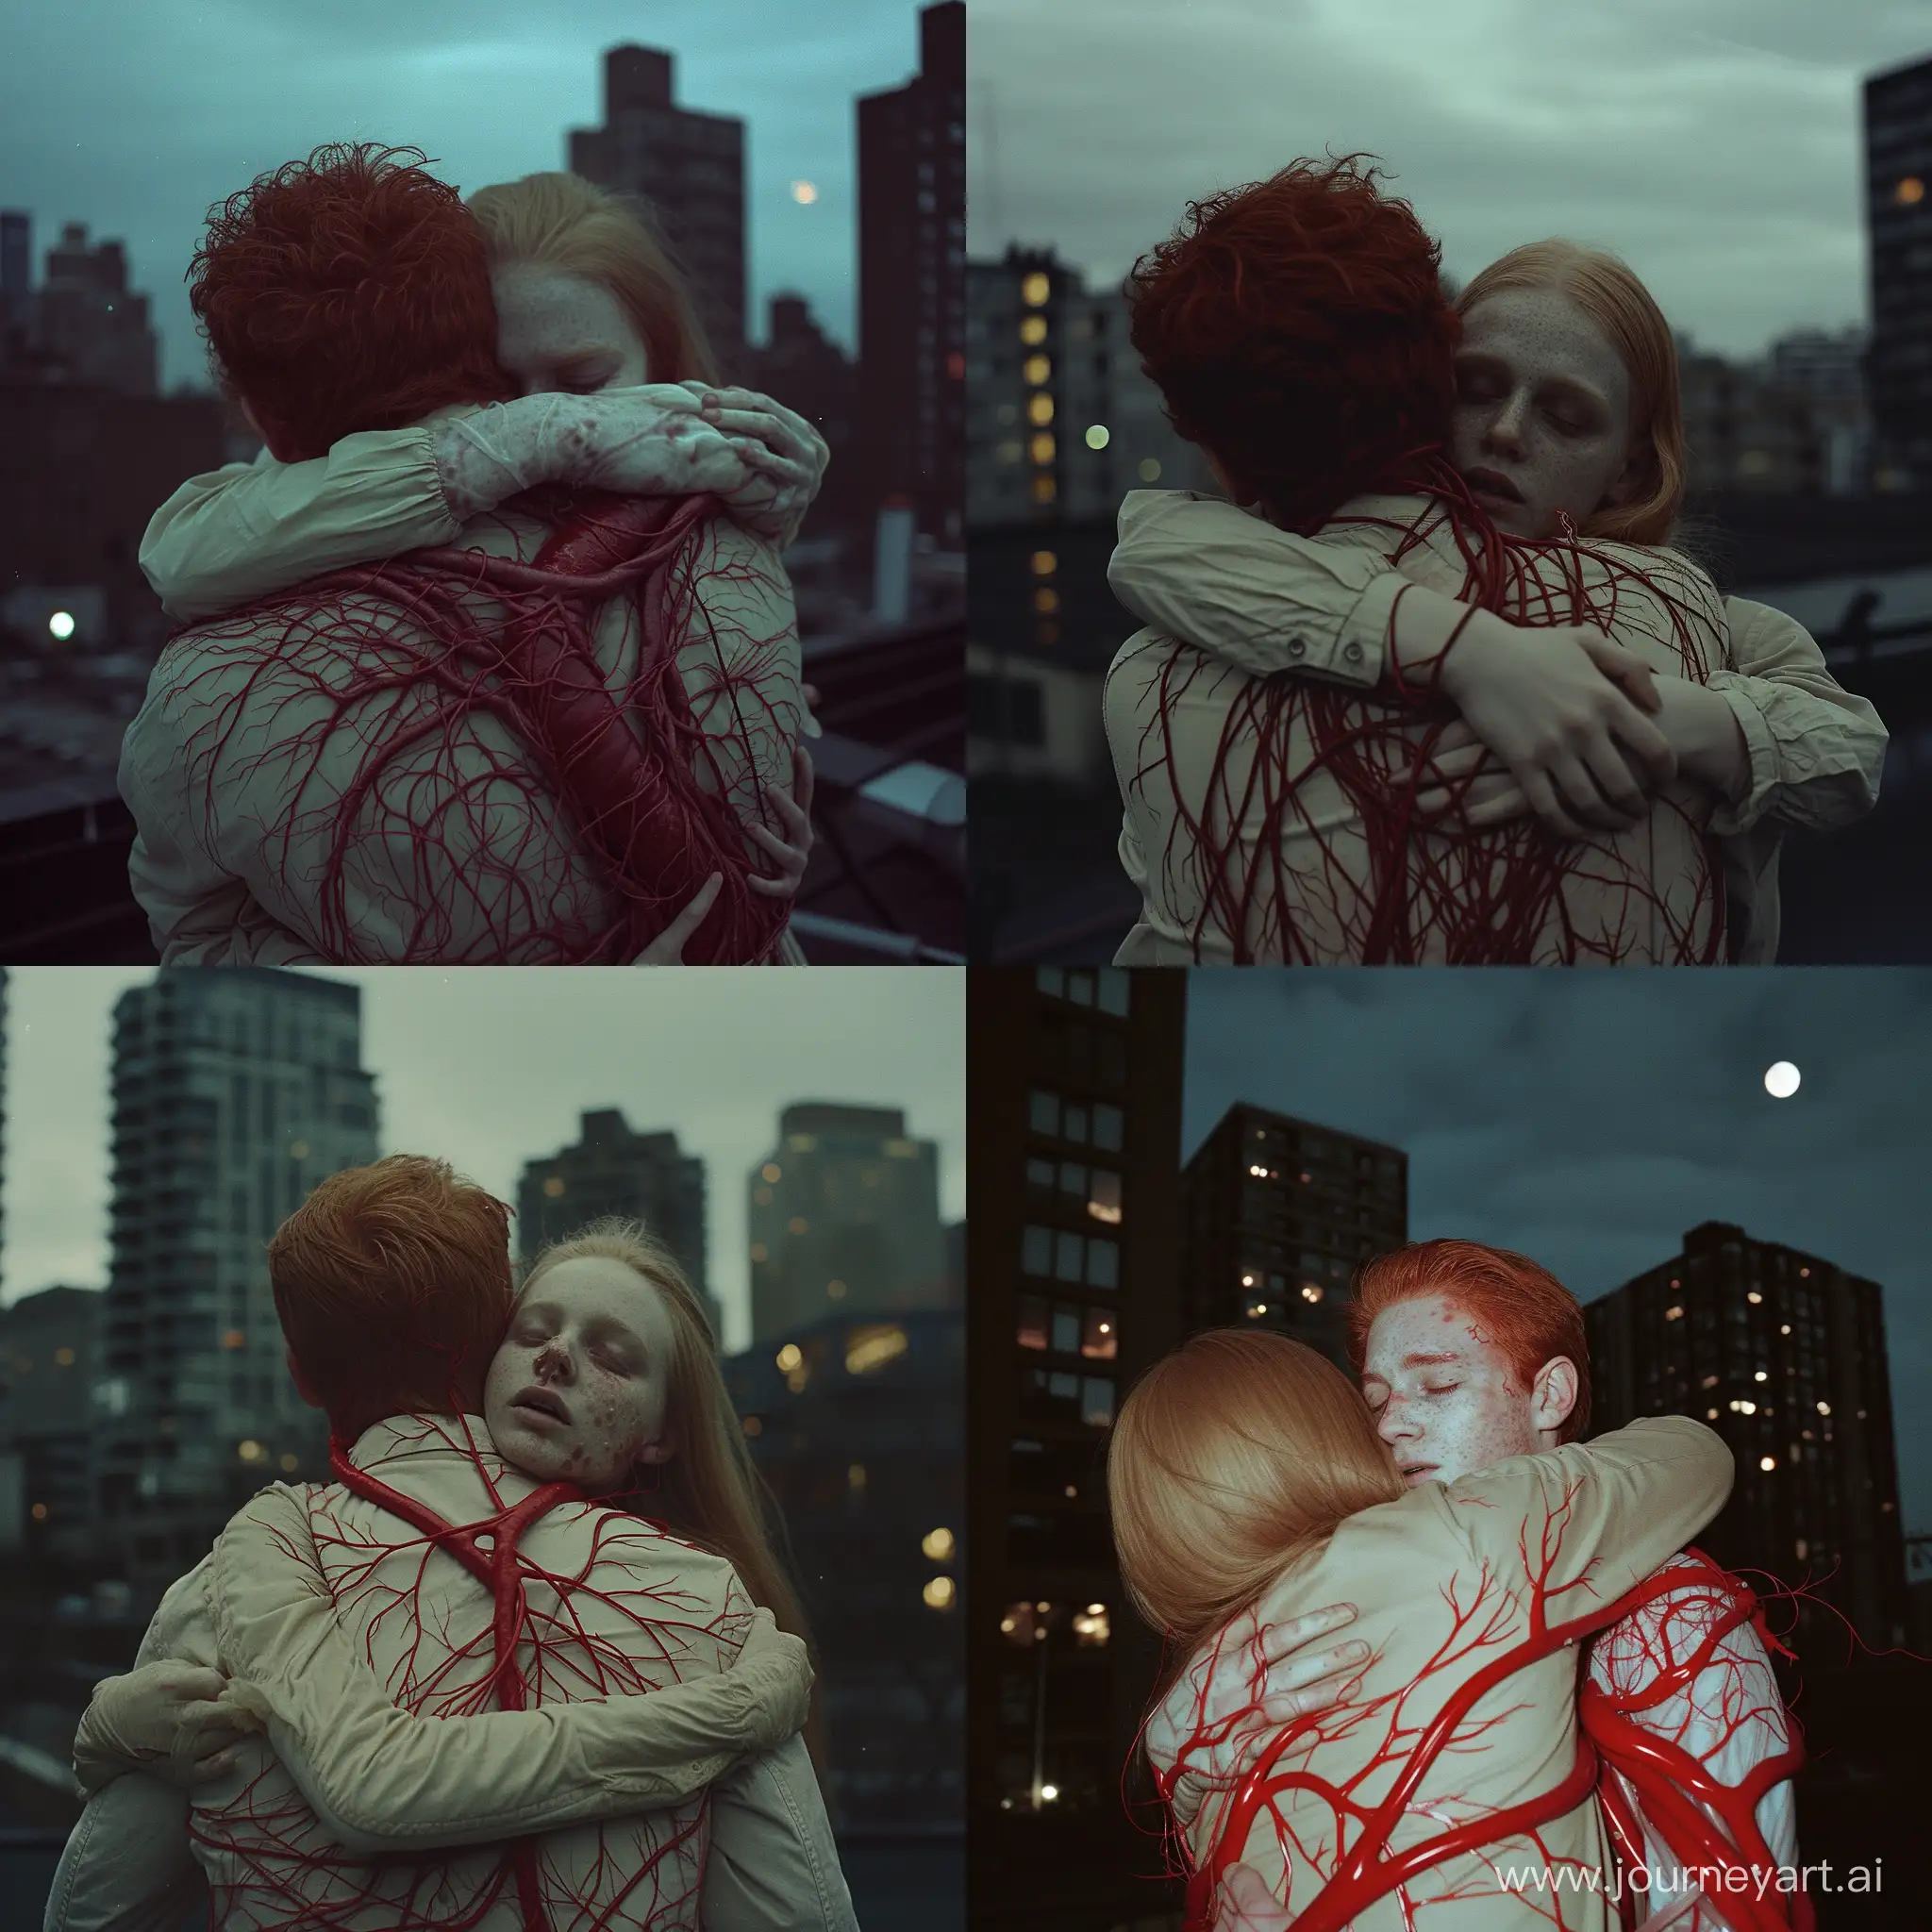 ultra-realistic shot on 16mm camera from the back. redhead man somewhere around buildings. beige girl hugs him.  very dark night, urban wide-shot with buildings in the background somewhat blurry, photo with 8mm, looks like part of the music video. noisy photo, night lighting and moon blurred into the skies. all around them we see veins and arteries hugging them. close up shot on camera with flash, close up, eery dark feeling, ultra-realistic